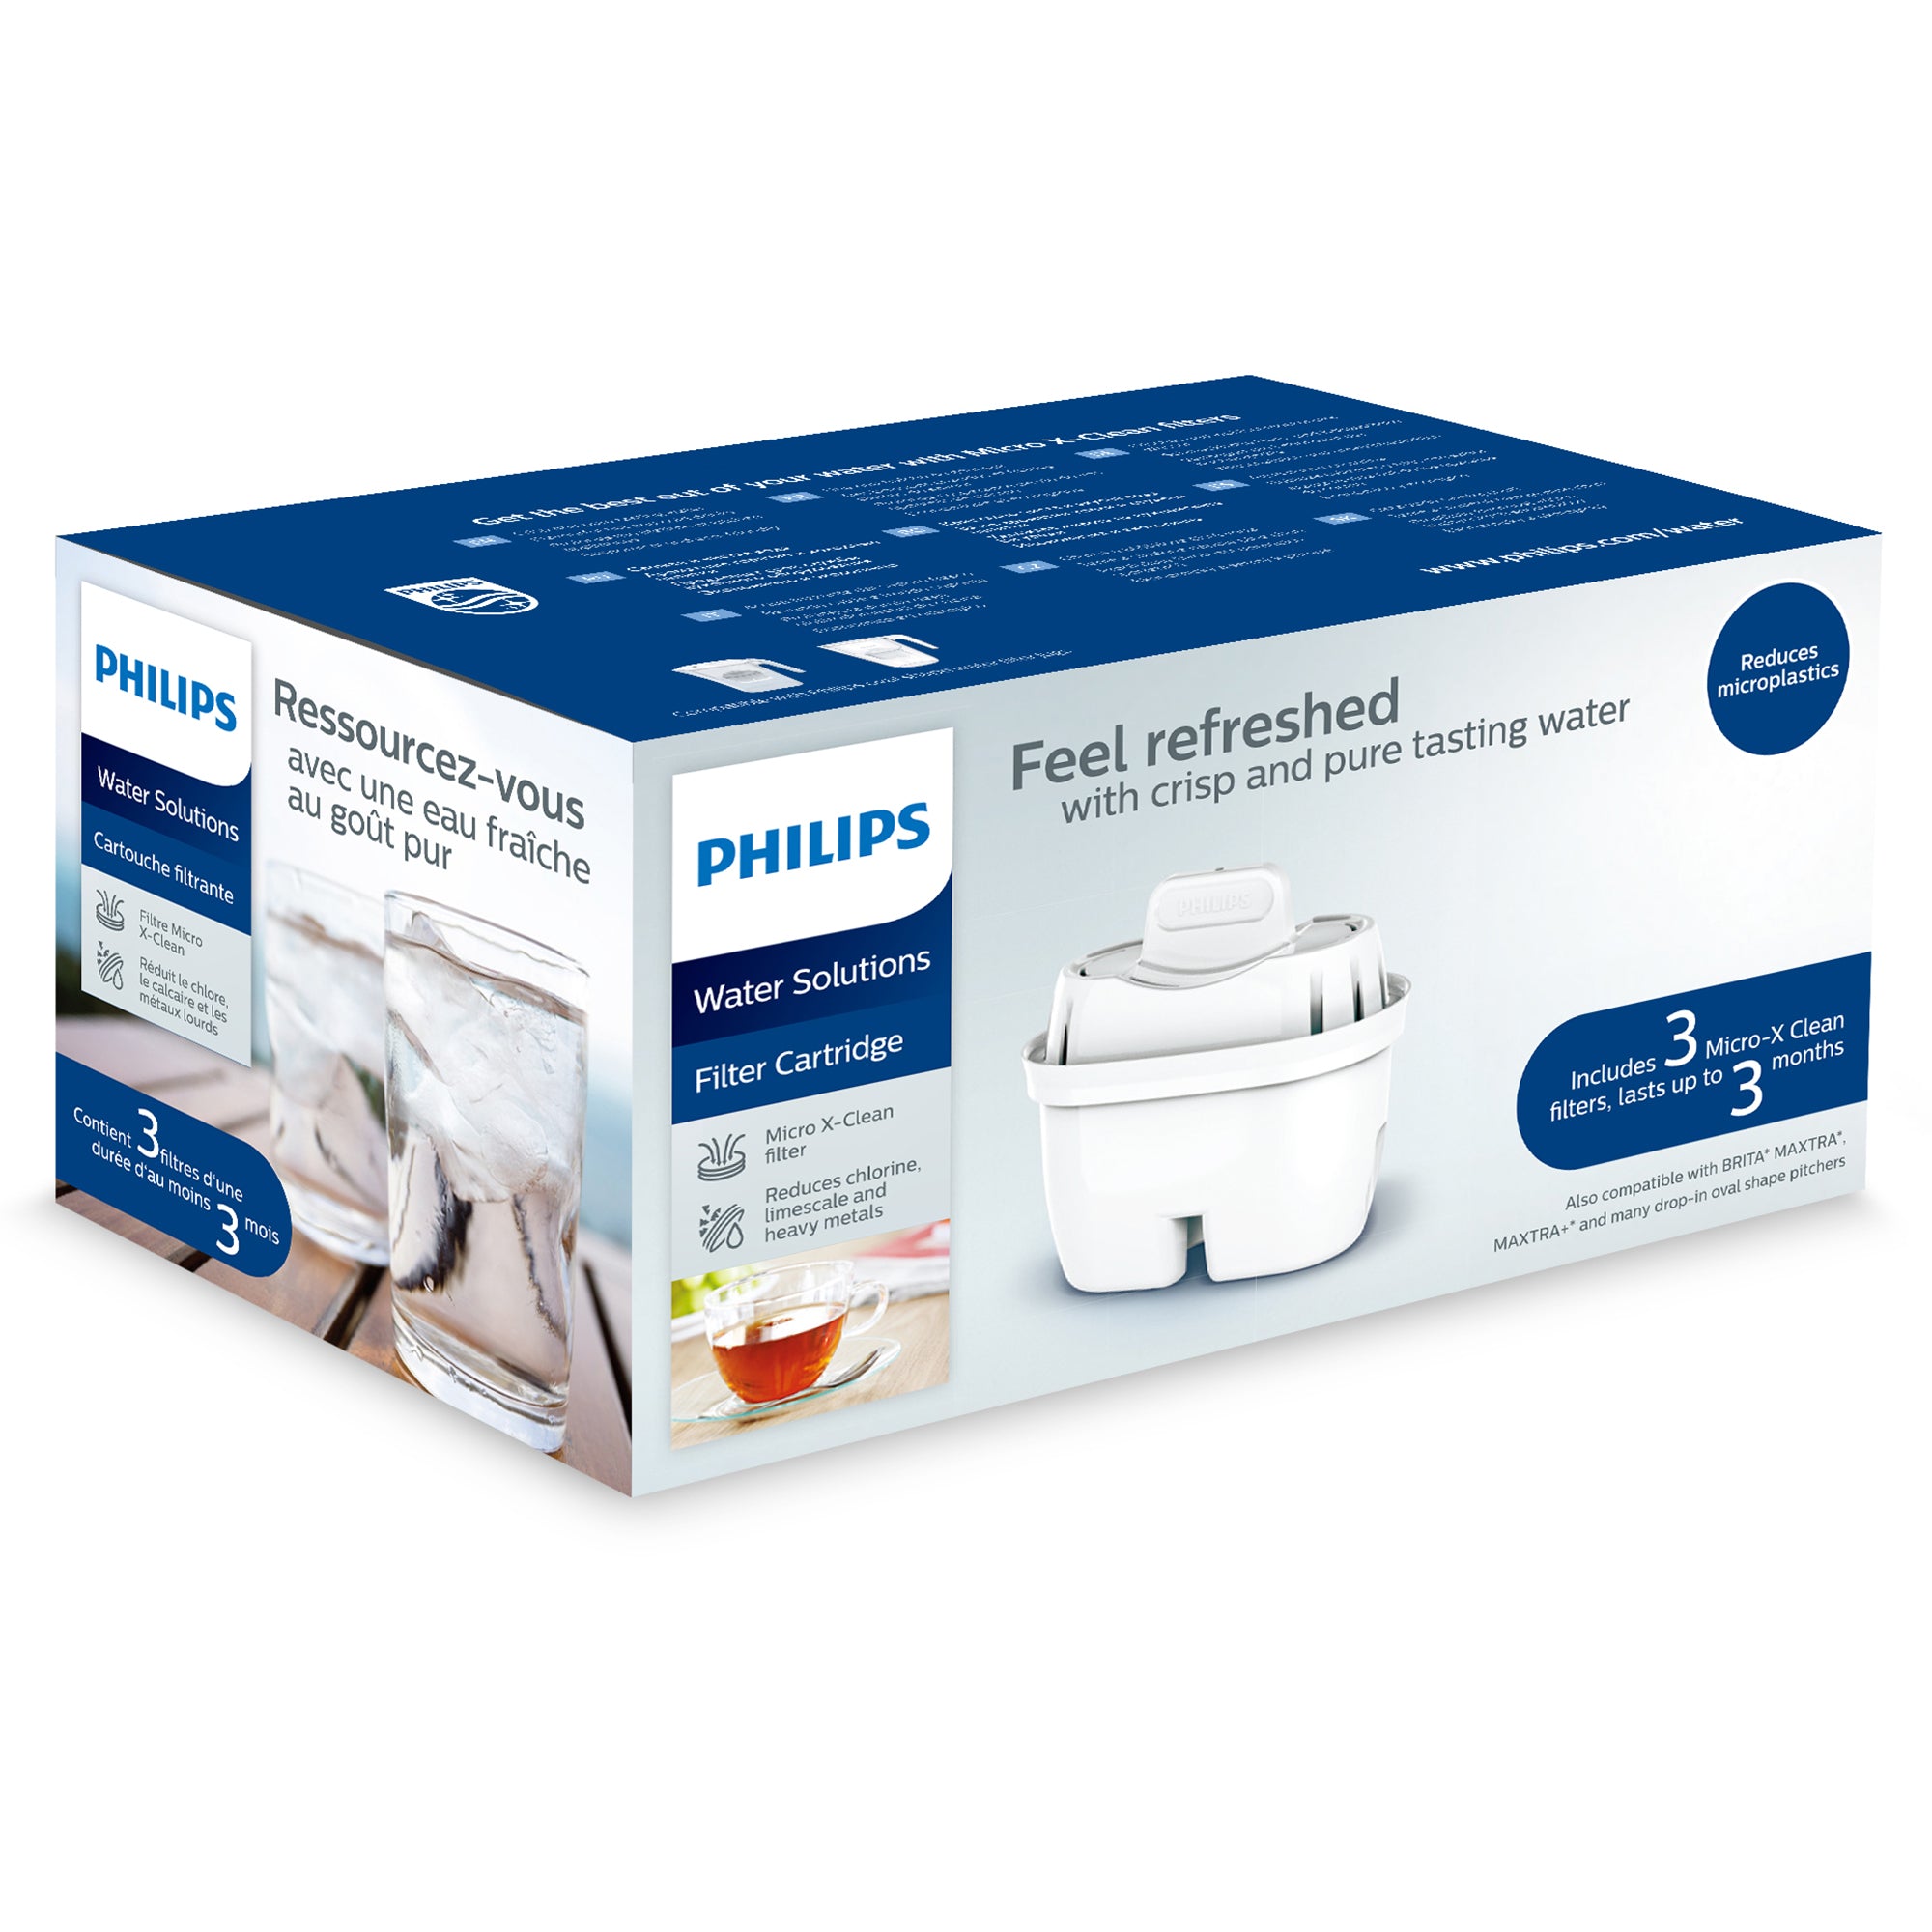 Philips Micro X-Clean Carbon Filter AWP211 for MF Water Station (6-pack)